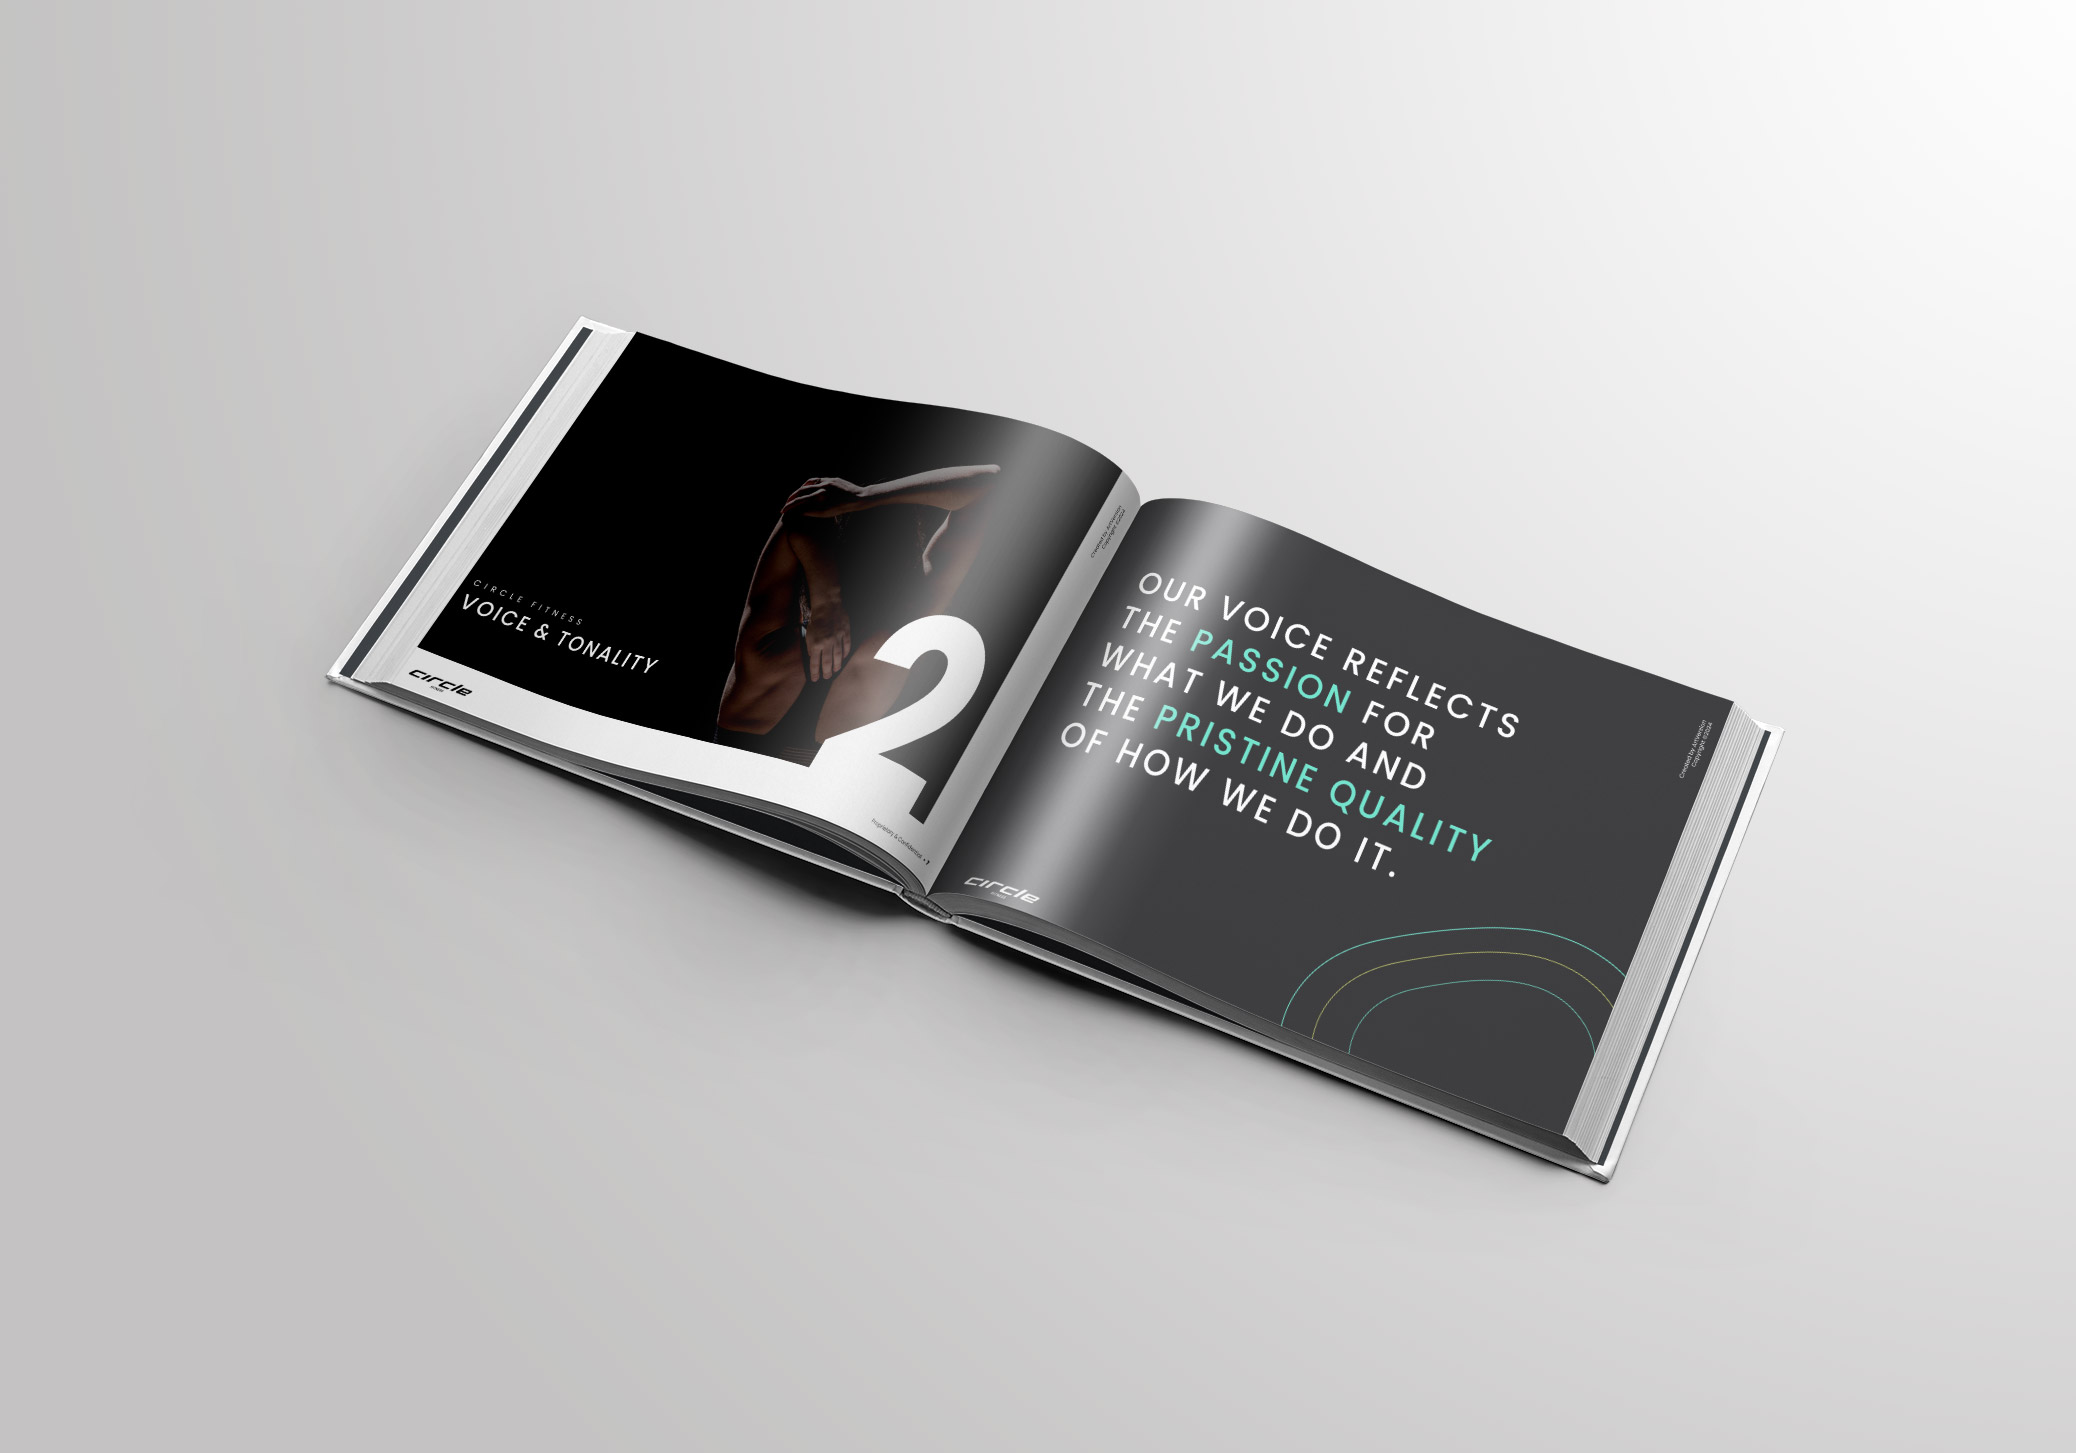 A book mockup of a voice and tonality section for brand guidelines.